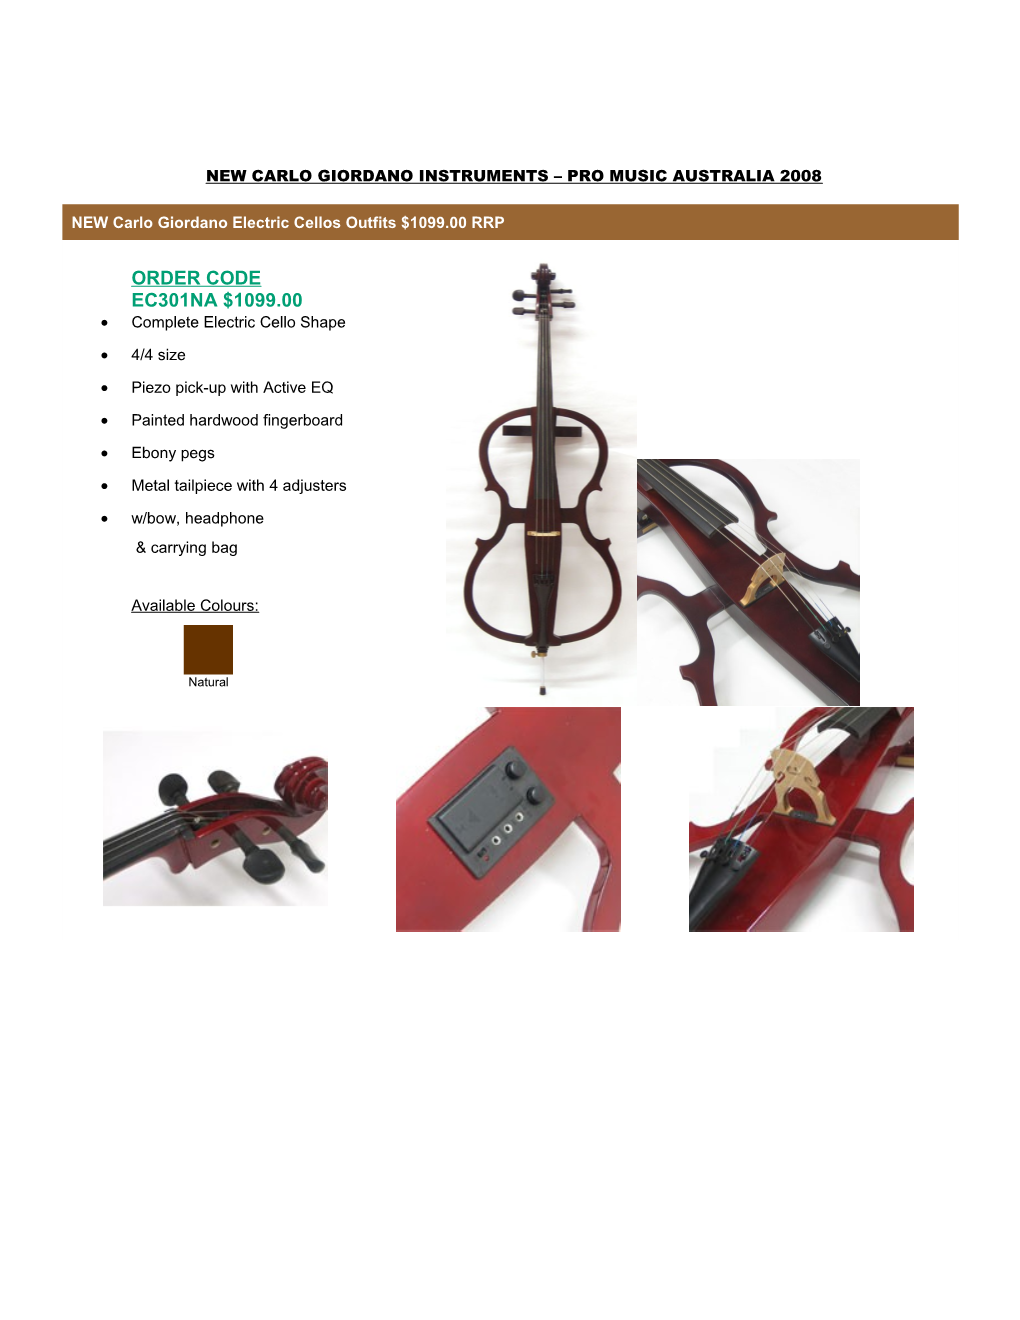 NEW Carlo Giordano Electric Double Bass Outfits $1399.00 RRP ORDER CODE EB401 (Colour